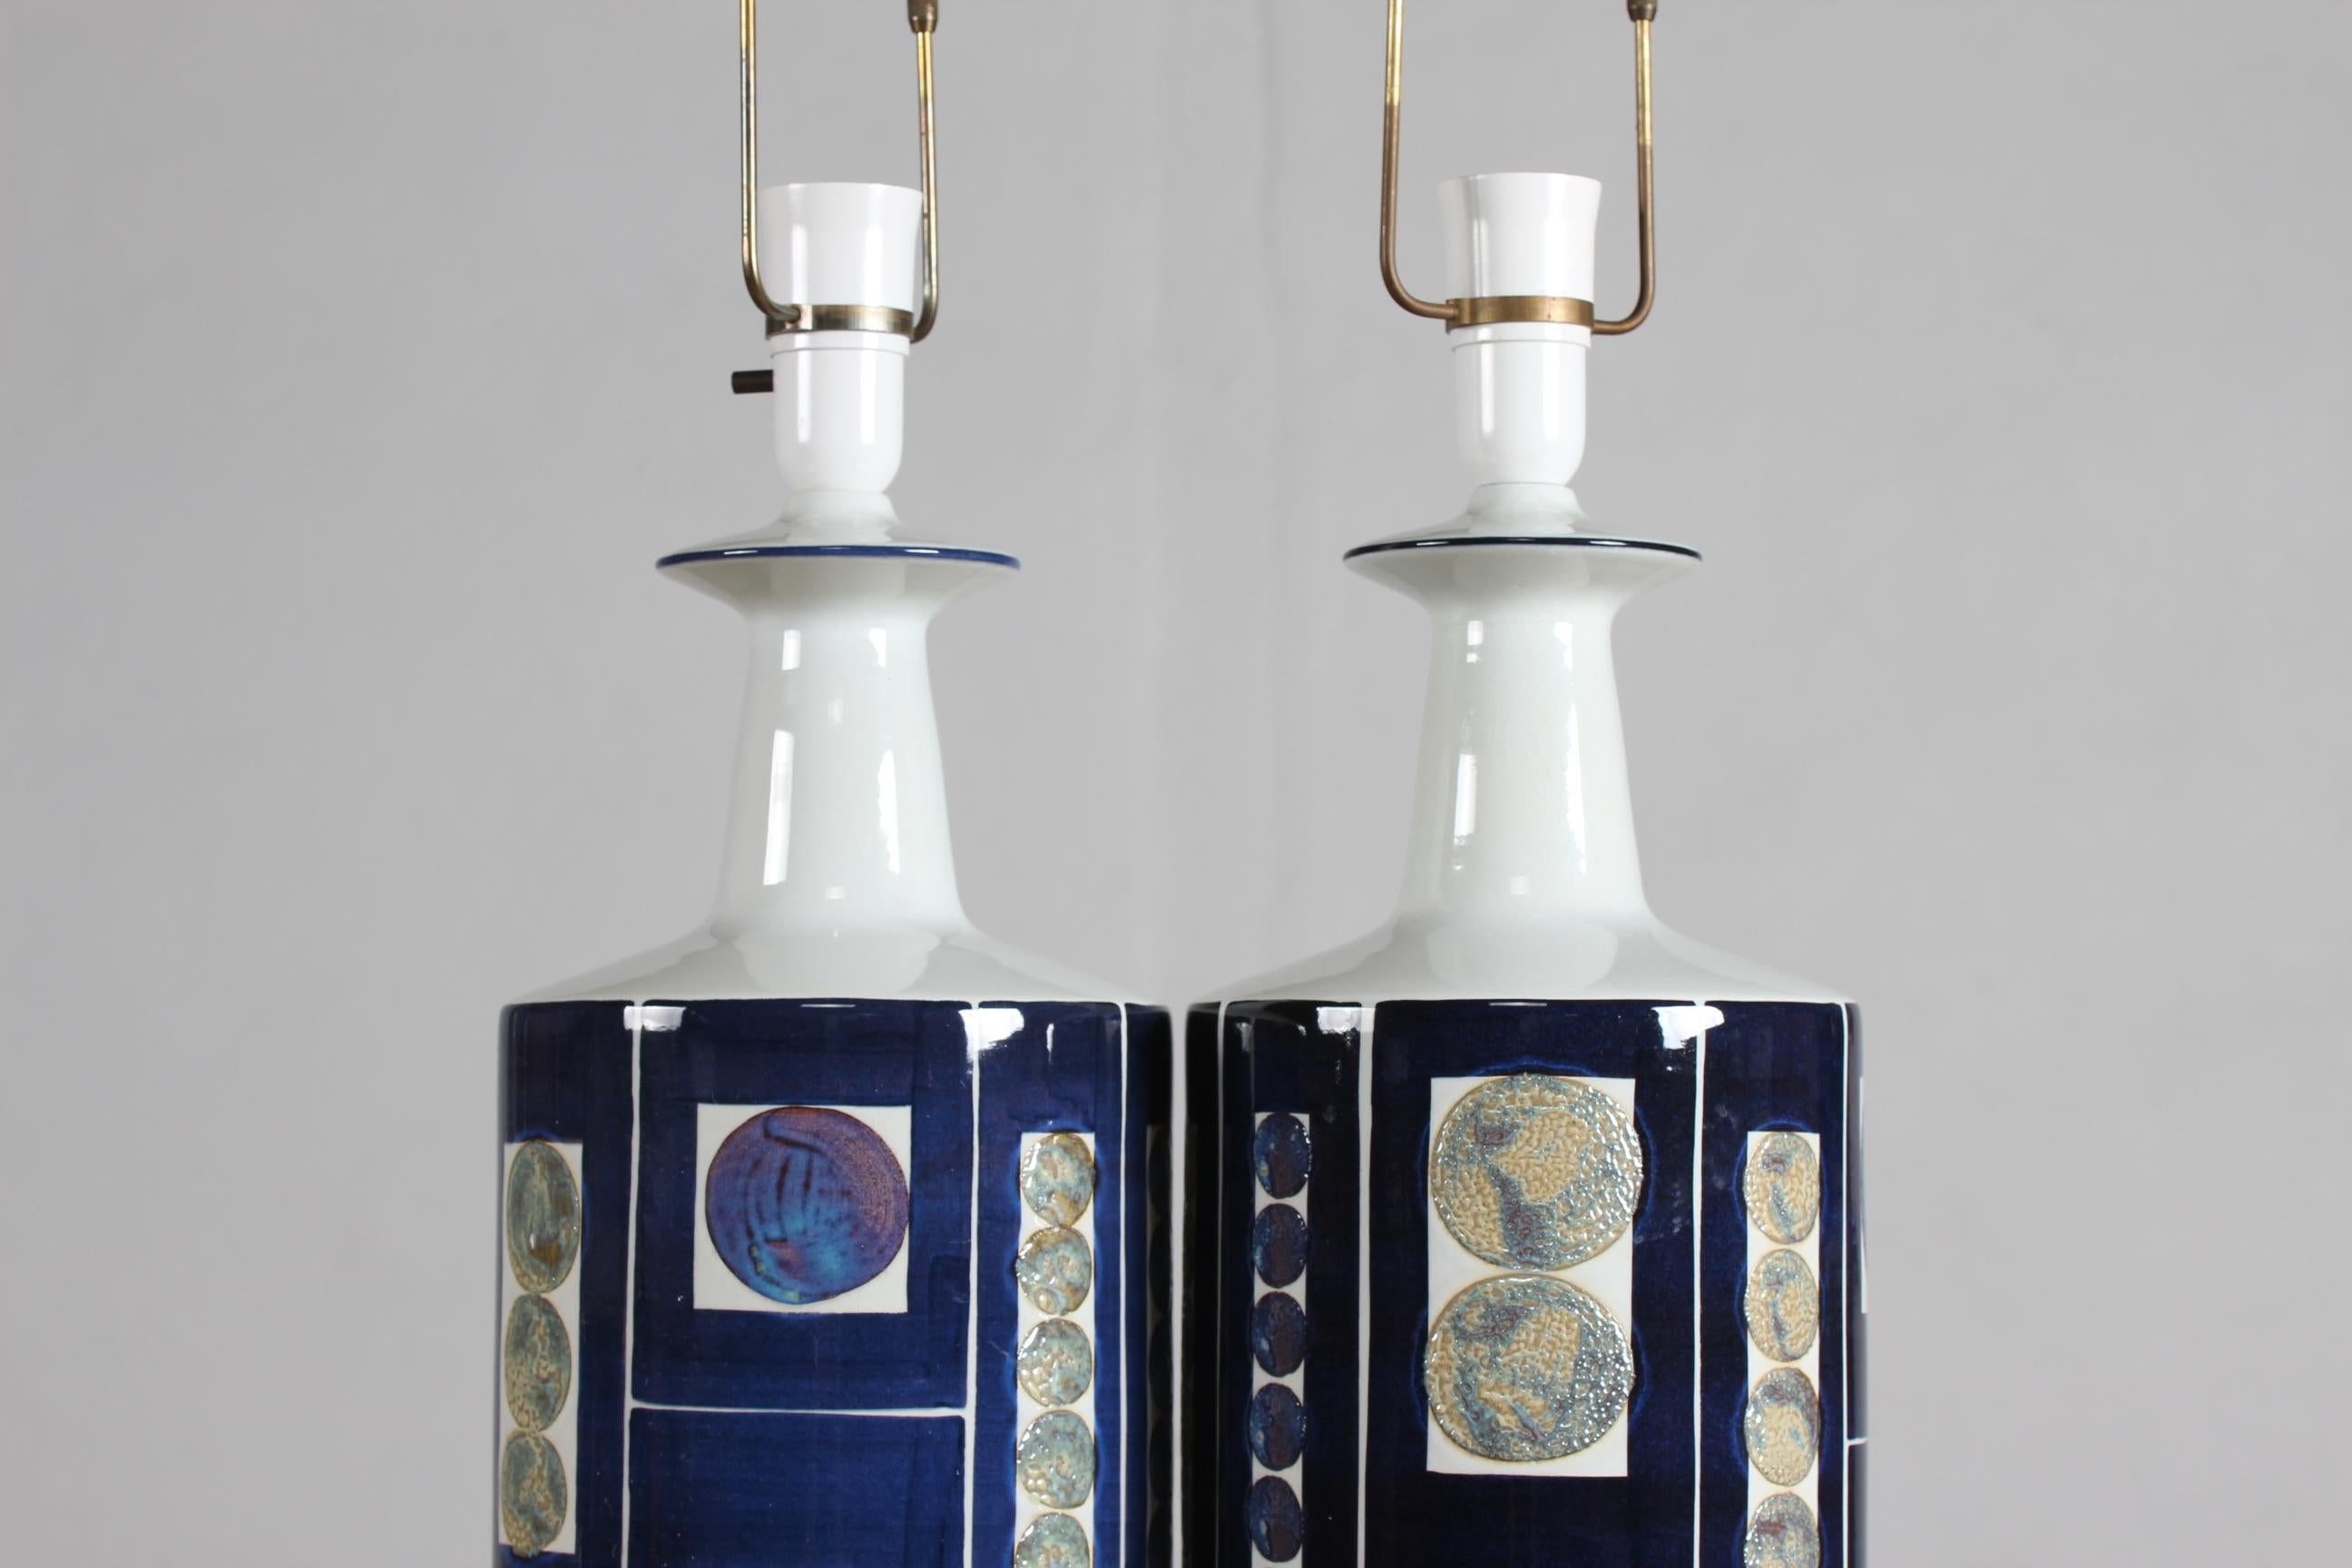 Pair of Aluminia Tall Table Lamps by Inge-Lise Koefoed, Danish Ceramic 1960s For Sale 4